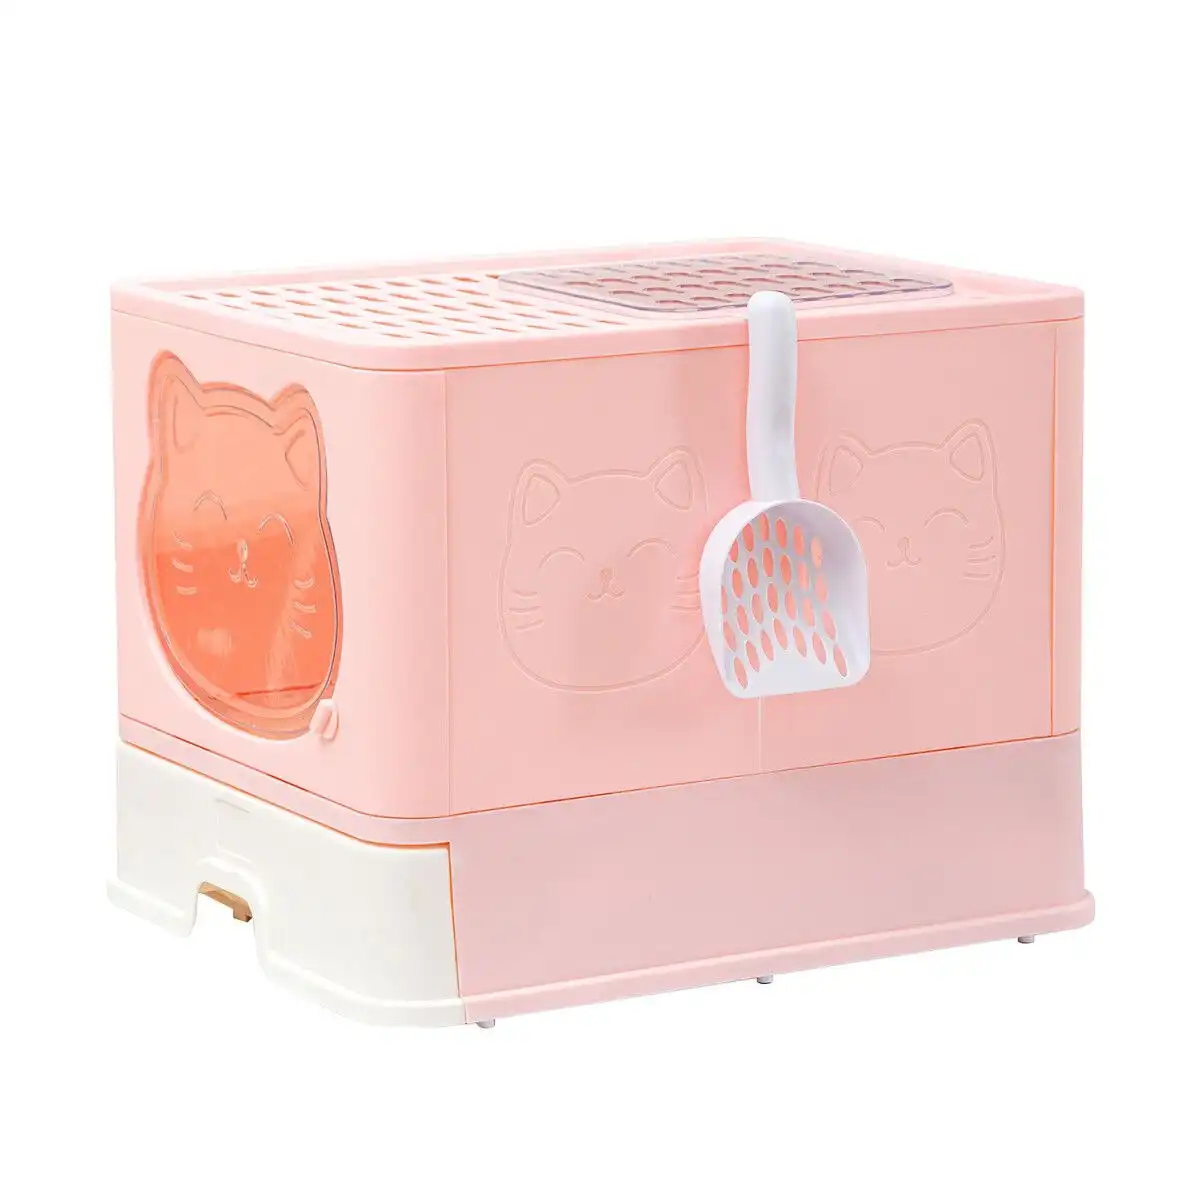 Pet Scene Cat Litter Box Kitty Toilet Training Enclosed Front Top Entry Lid Large Covered Hooded Kitten Potty Pan Furniture Scoop Foldable Pink